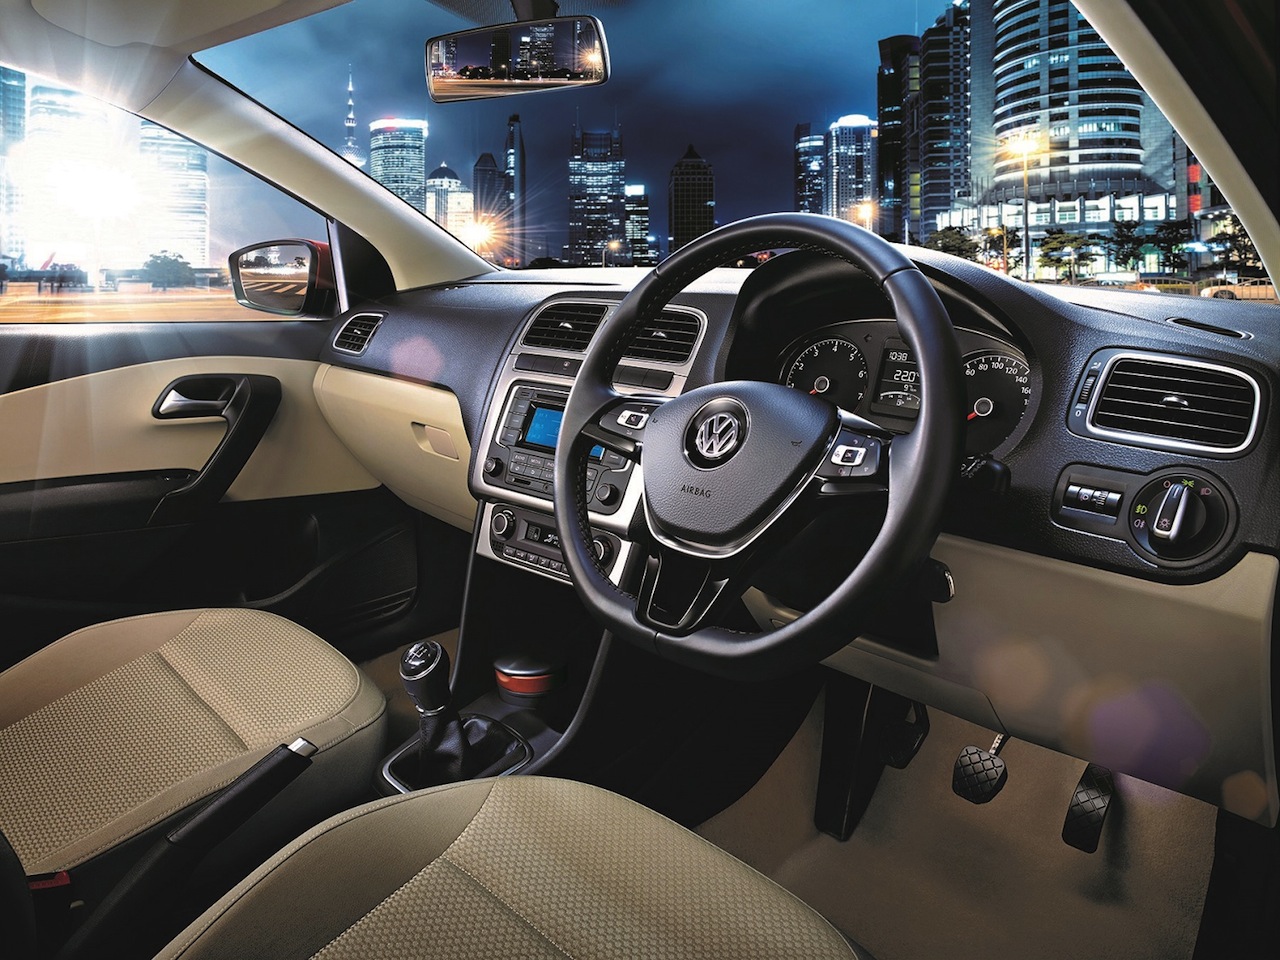 VW Ameo interior will be largely identical to the VW Polo as seen in this picture